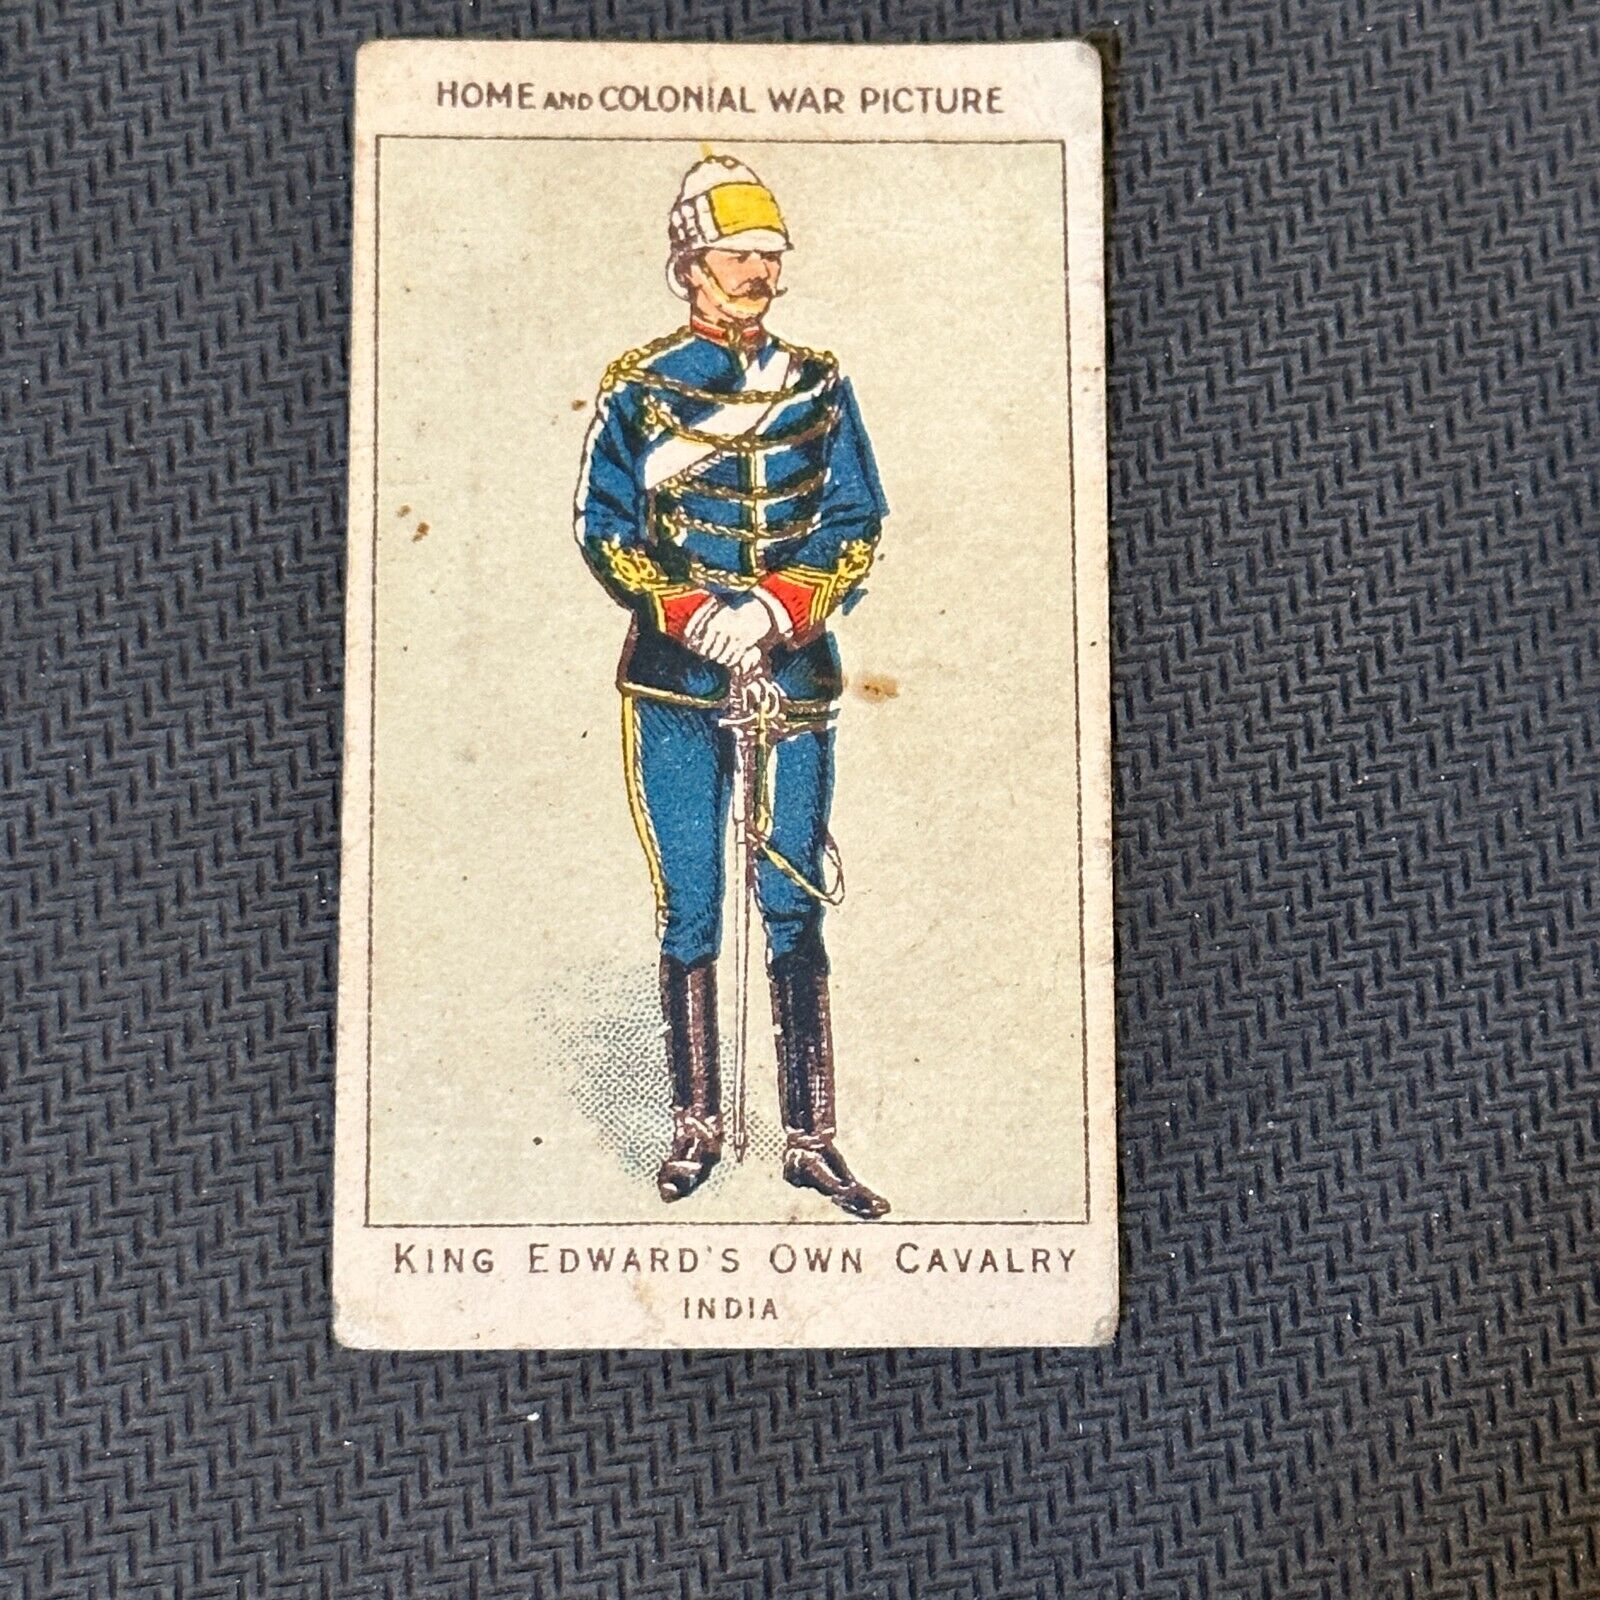 1916 Home and Colonial War Picture Card Singles - Perfect Margarine